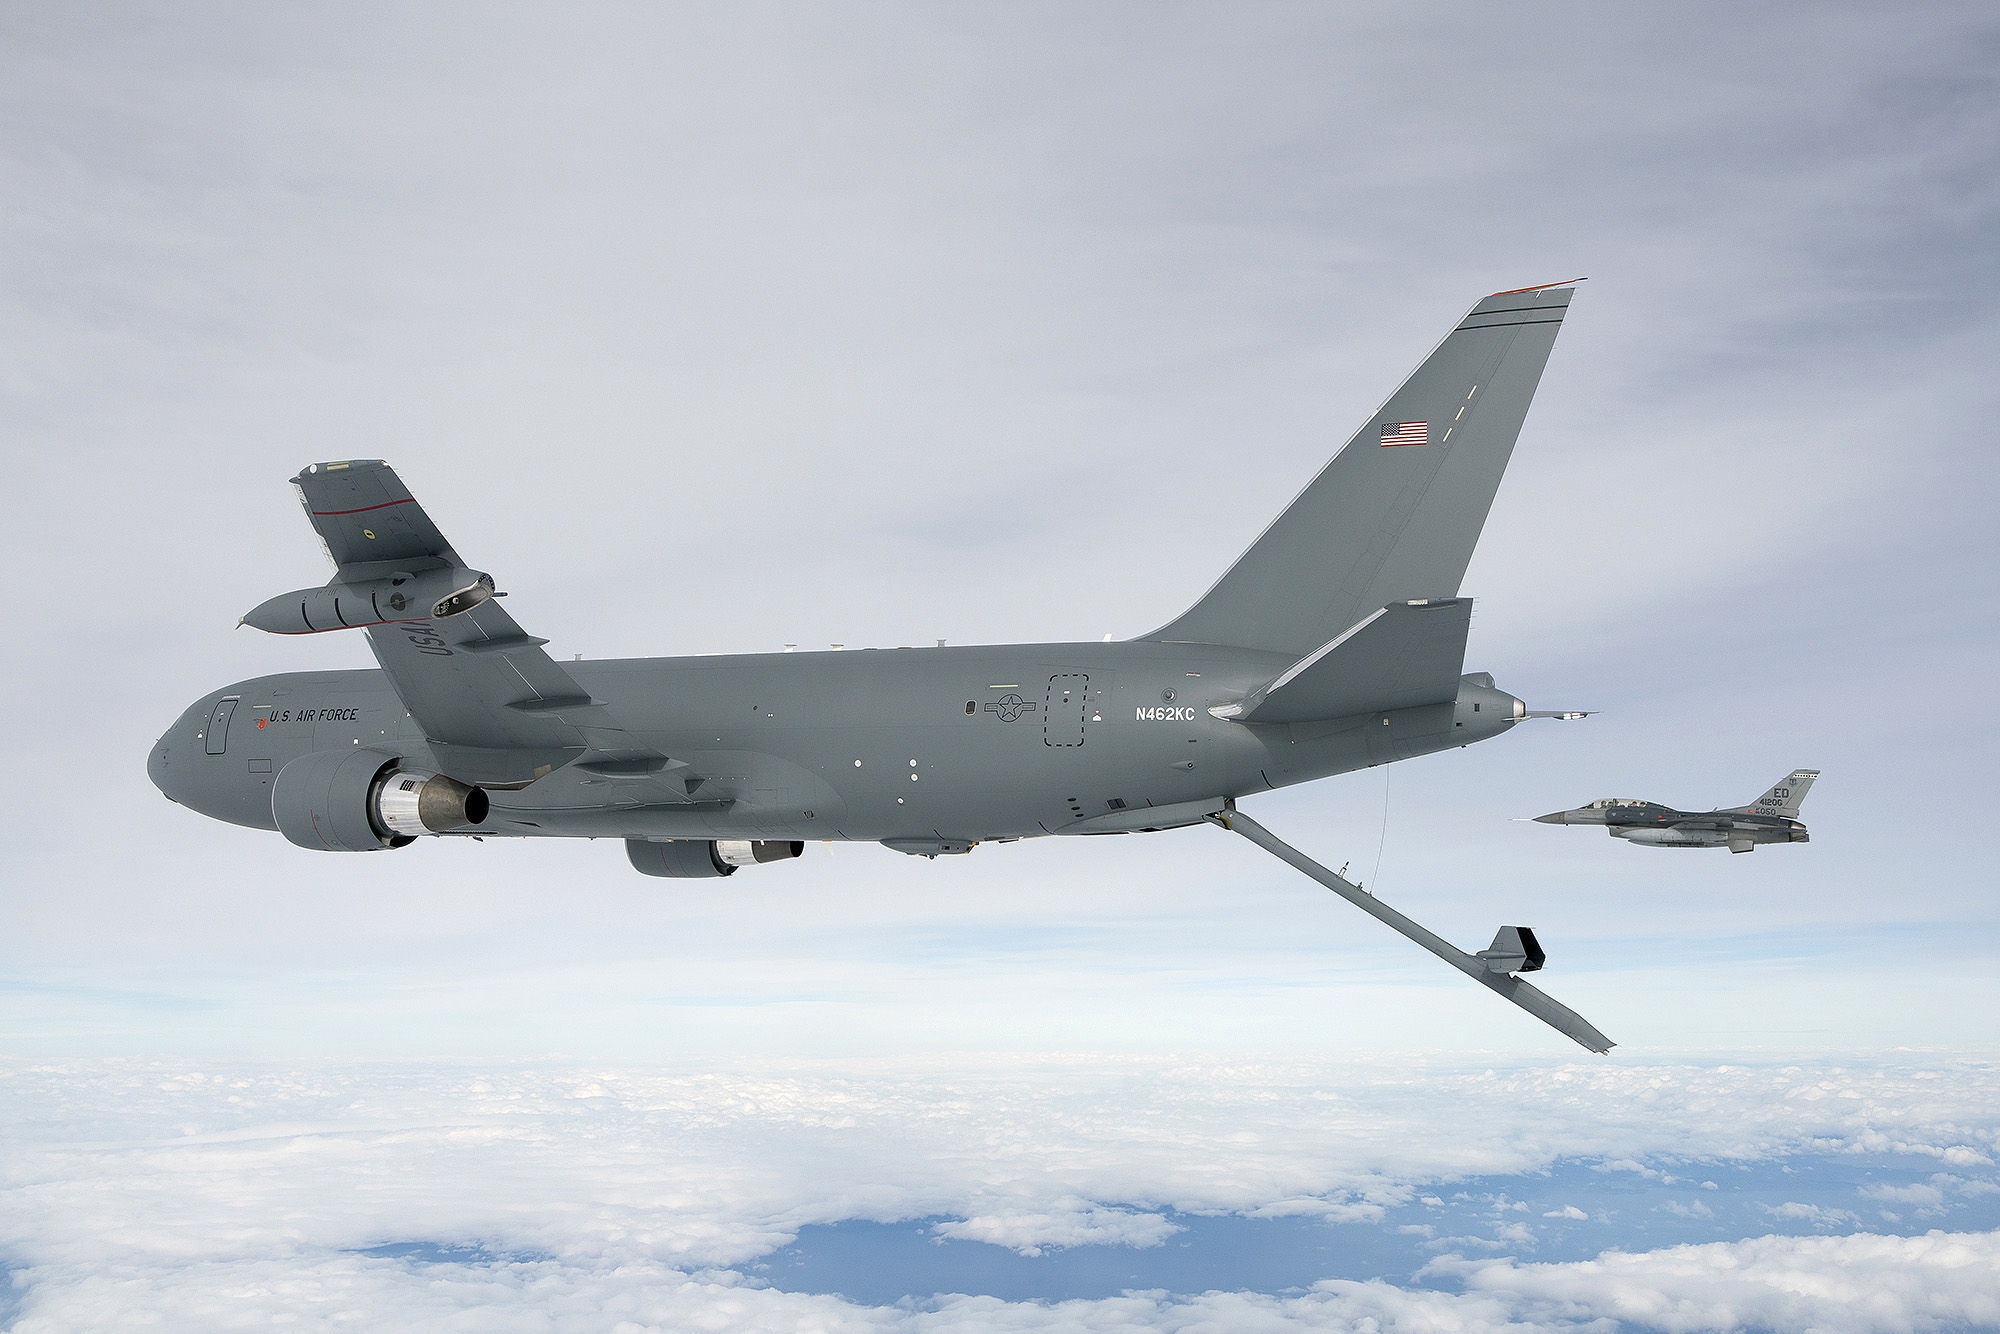 Boeing’s first KC-46 aerial-refueling tanker deploys its boom for the first time during a test flight Oct. 9, accompanied by a U.S. Air Force fighter. The tanker is based on Boeing’s 767 and assembled in Everett.